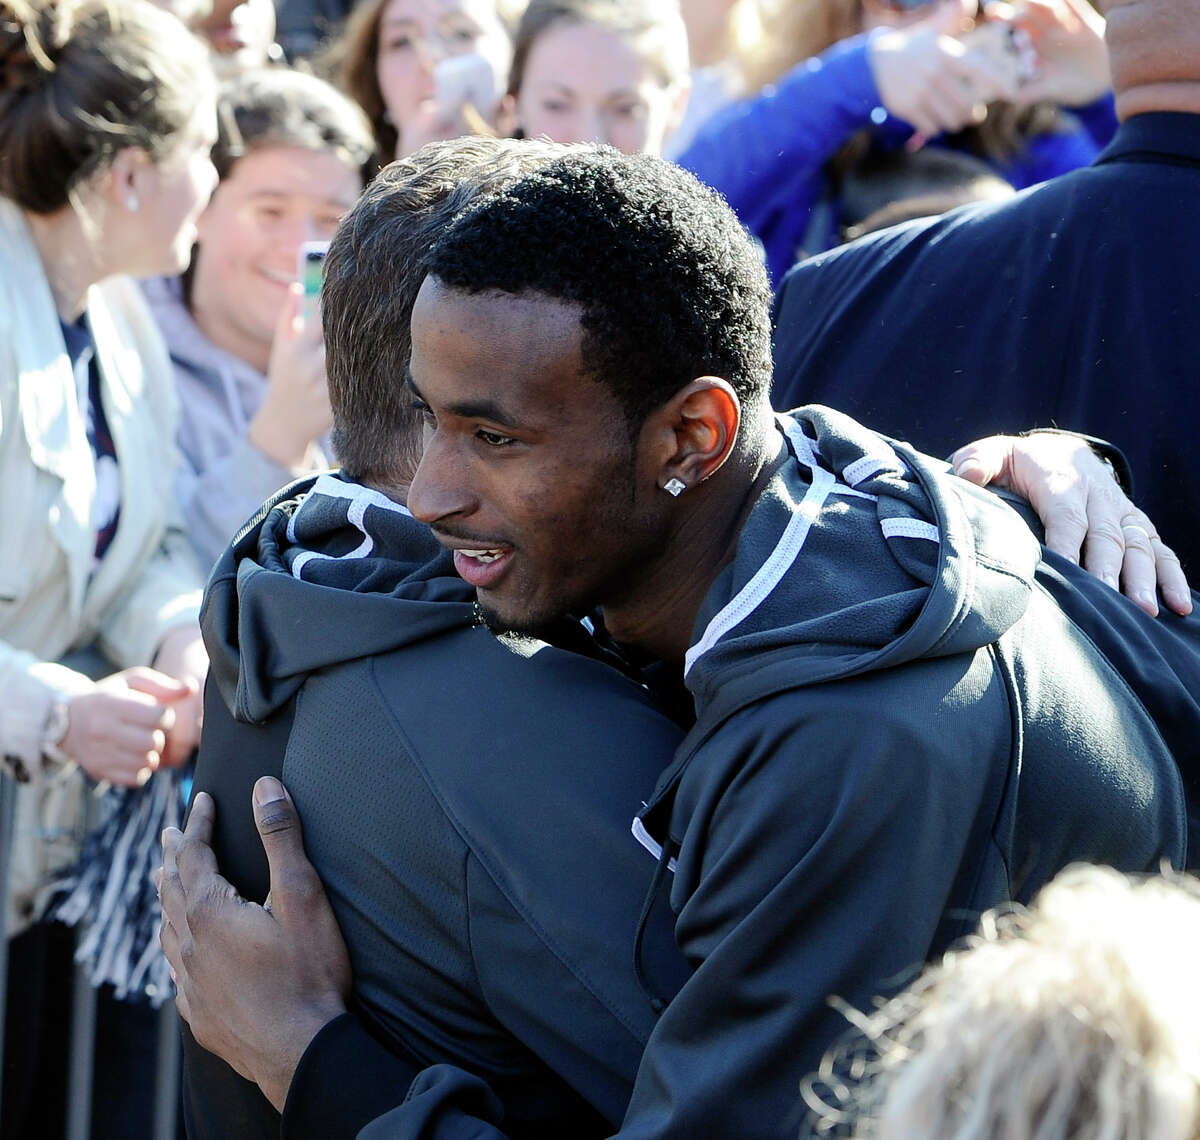 Connecticut men's basketball player DeAndre Daniels, right, hugs Connecticut women's head coach Geno Auriemma after Auriemma arrived on campus with his team for a rally celebrating their NCAA title on Wednesday, April 9, 2014, in Storrs, Conn.